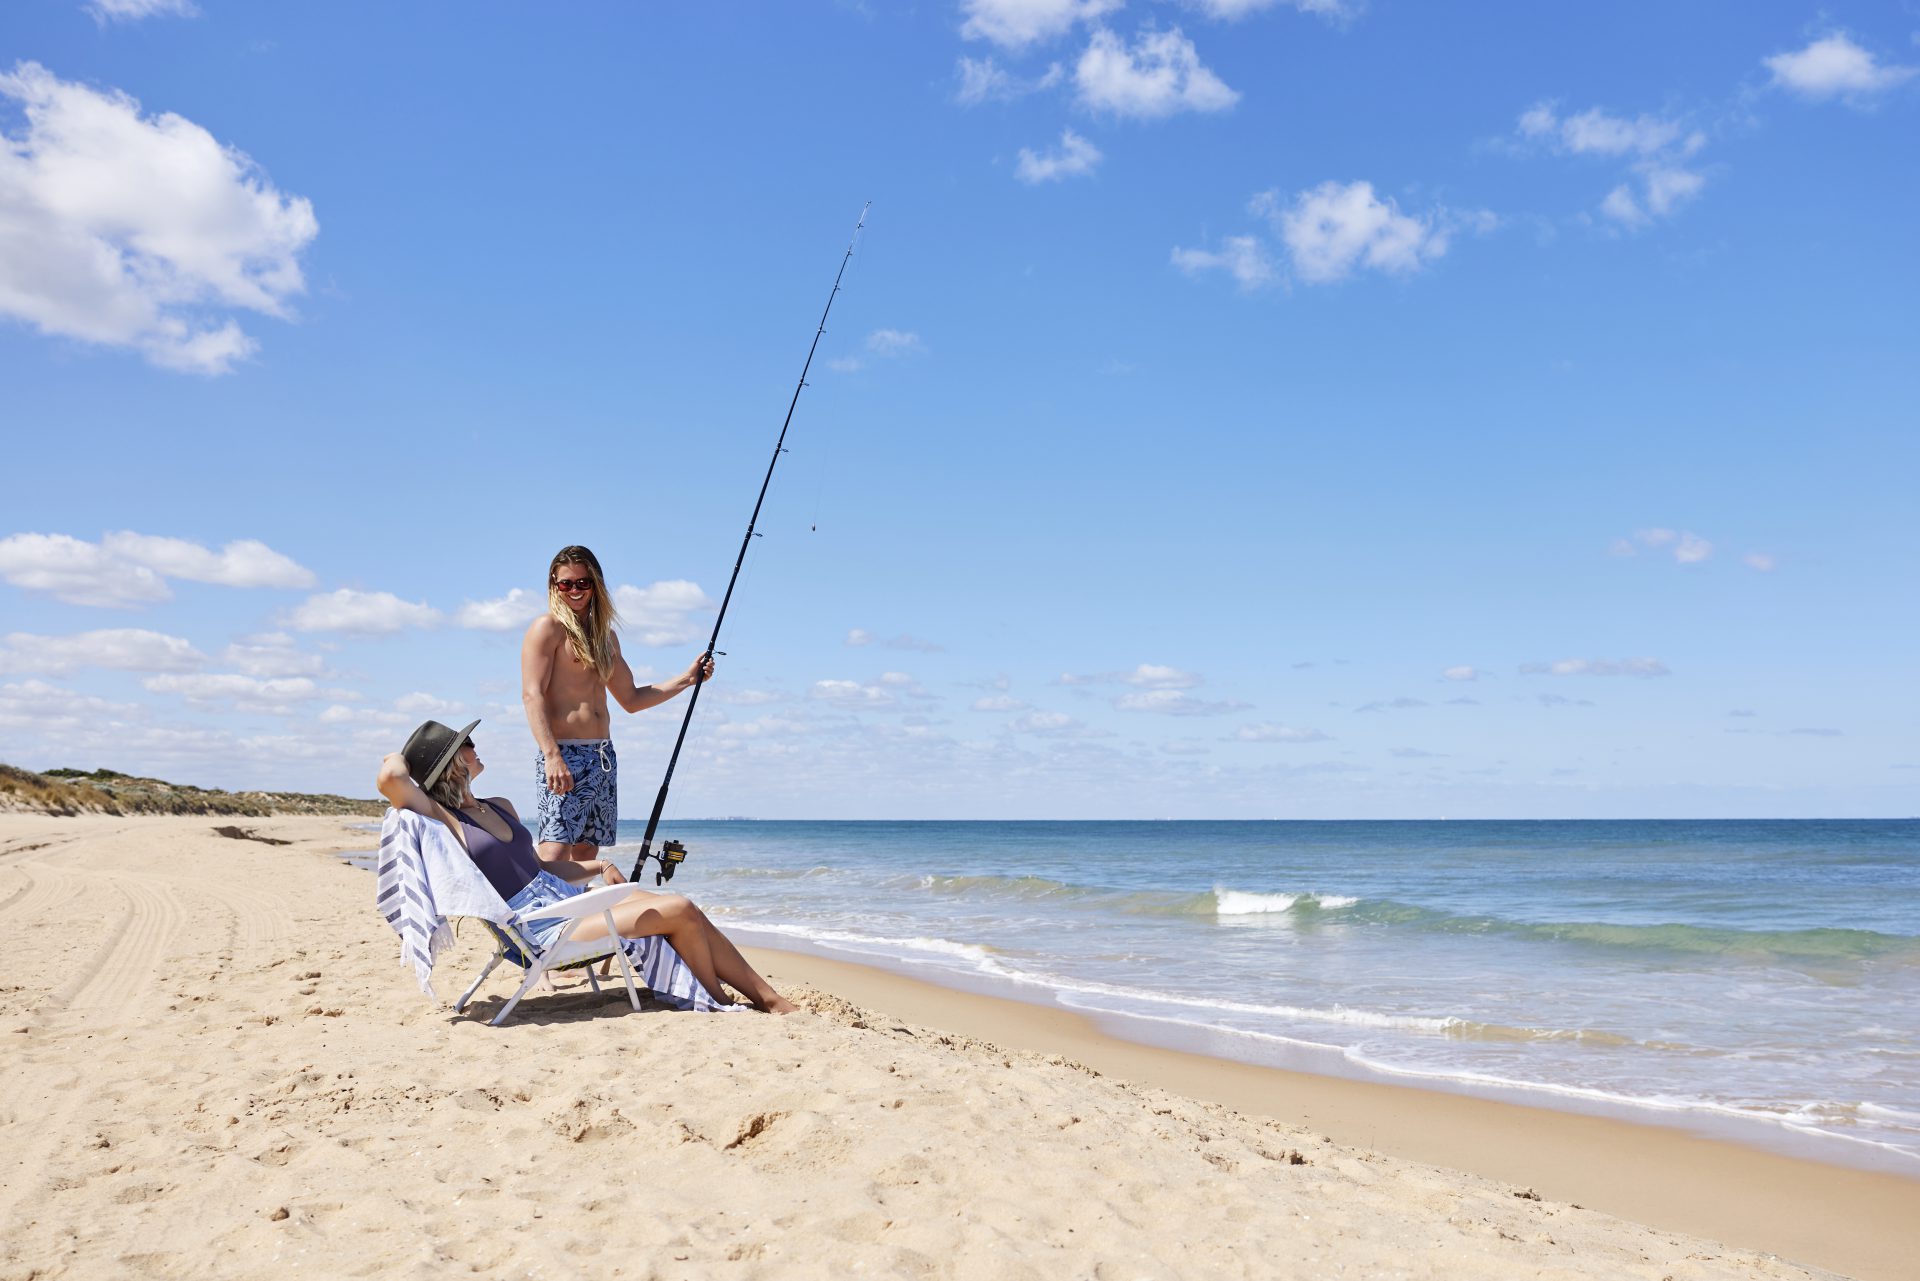 A man and a woman on the beach. The woman sits in a beach chair and the man stands next to her, holding a fishing rod.